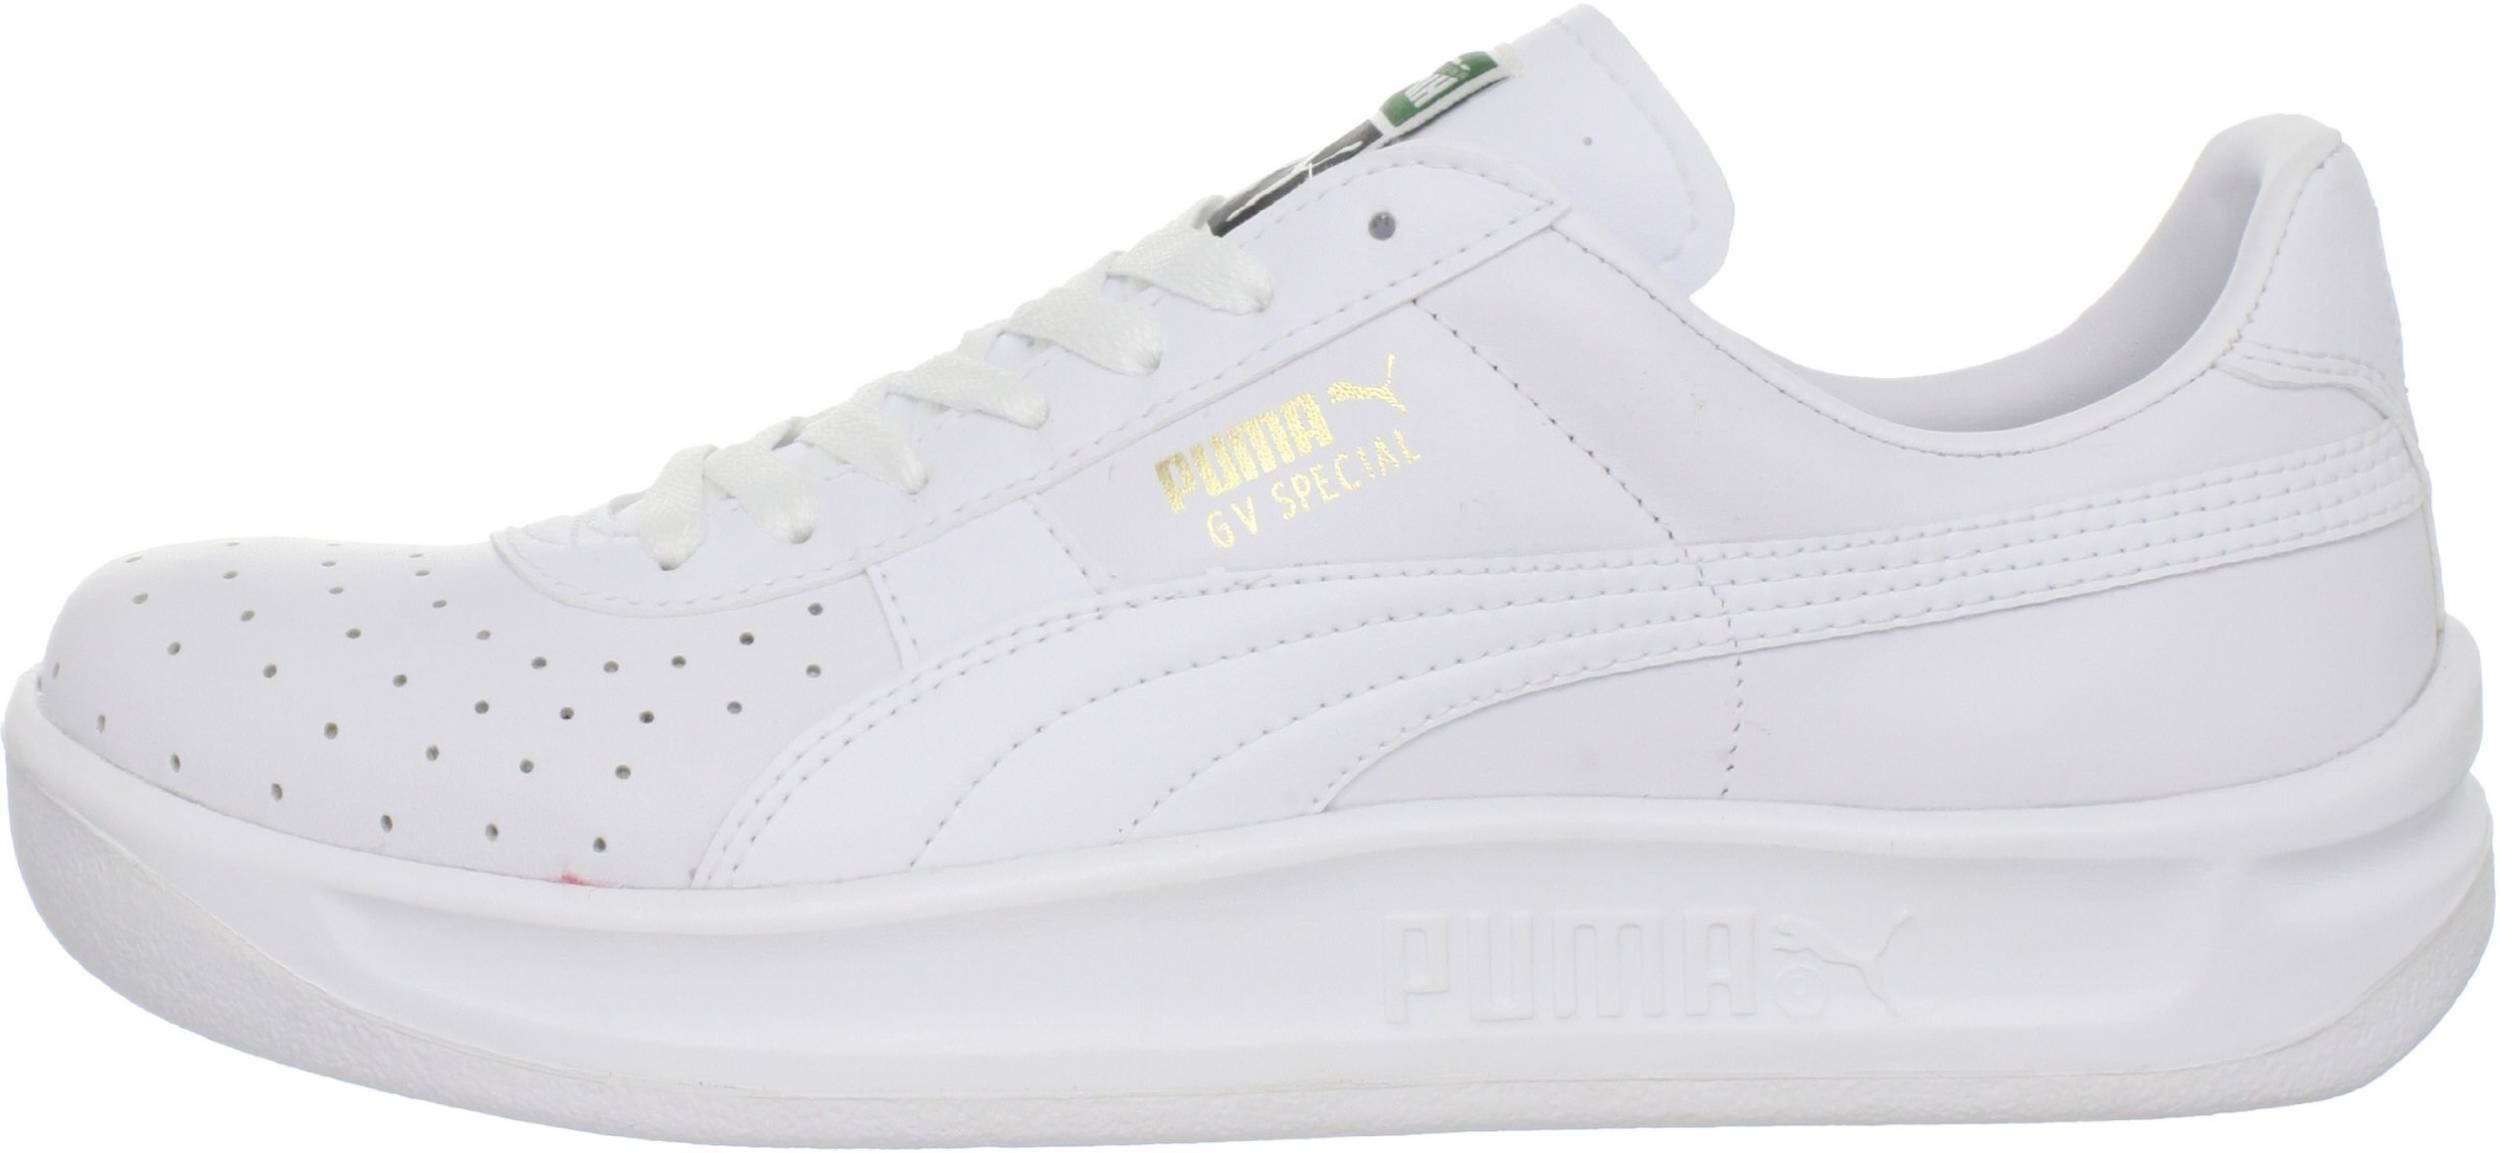 Puma GV Special sneakers in 3 colors 